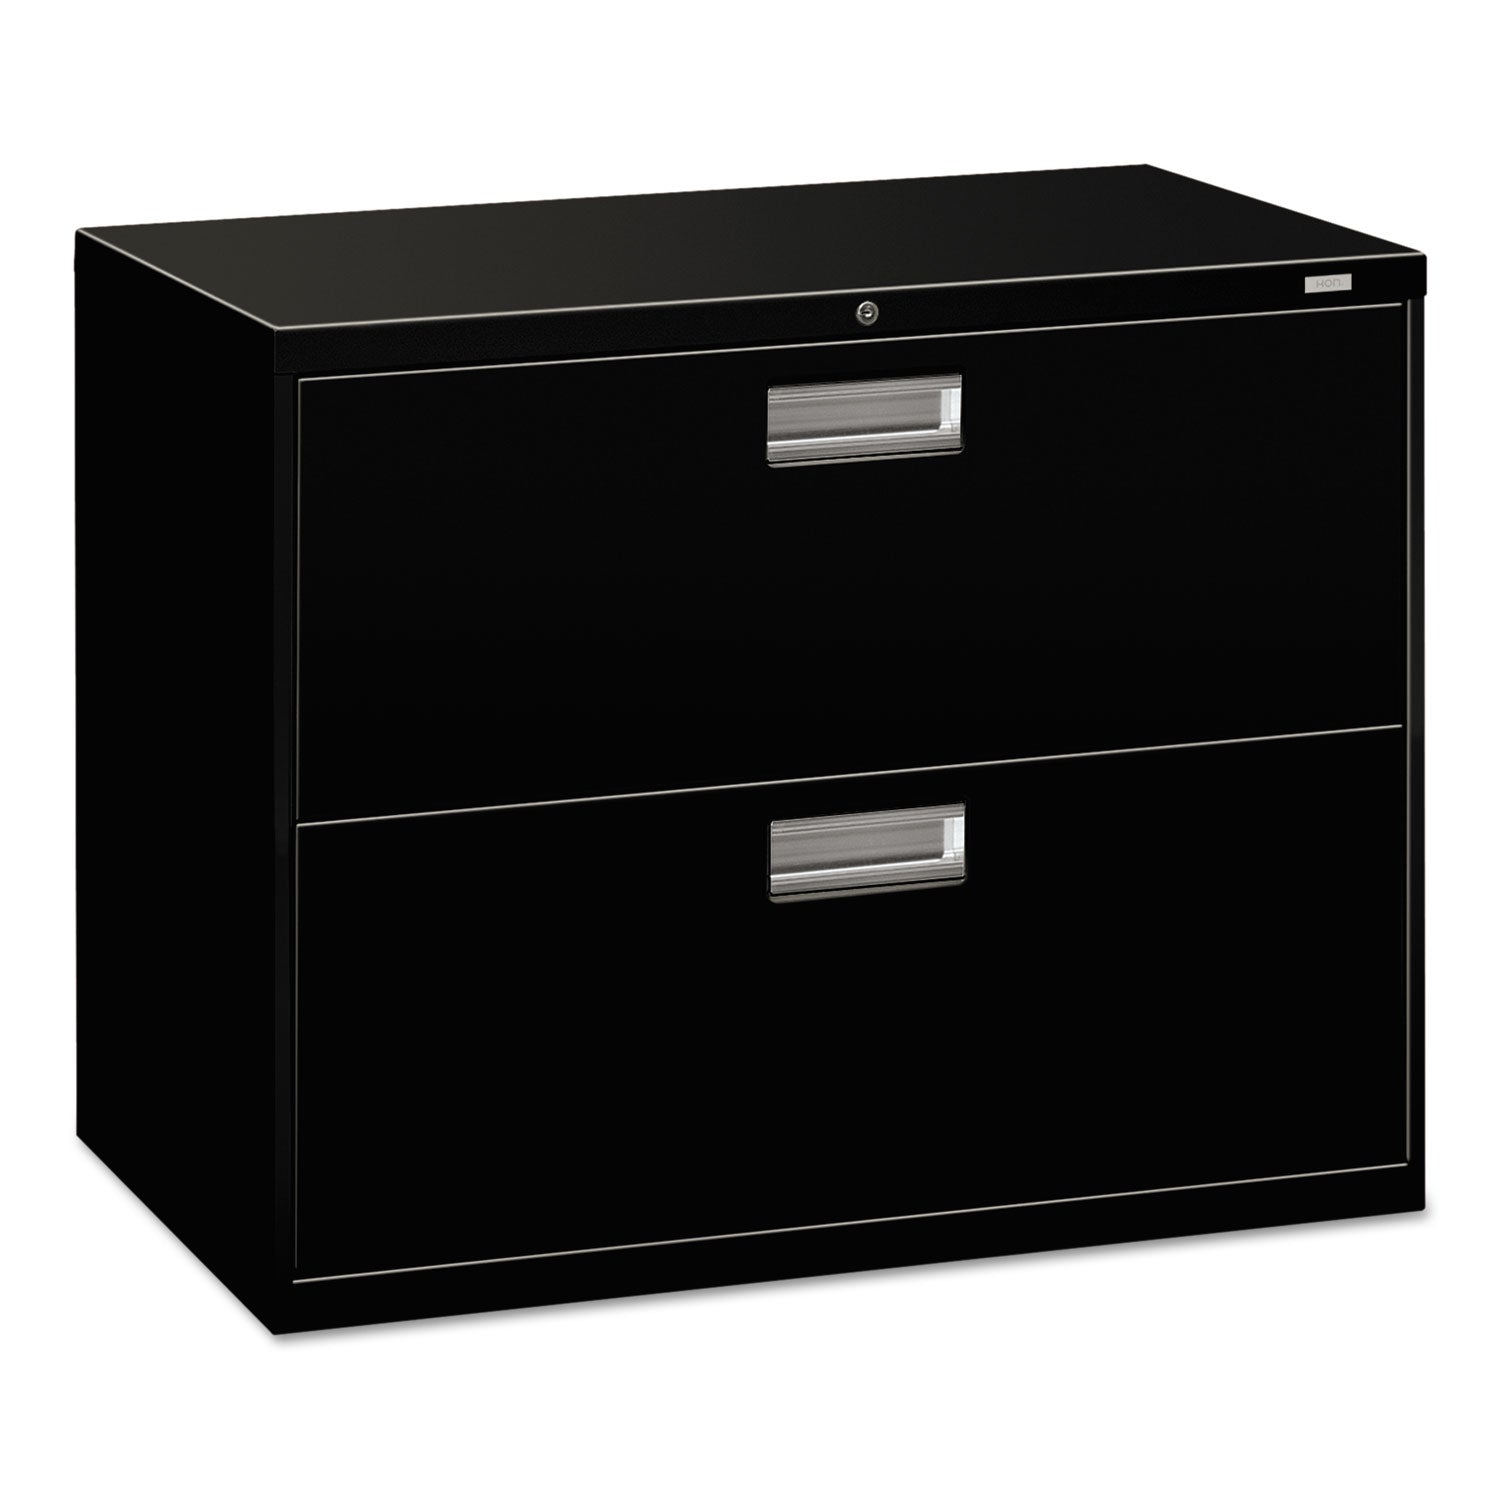 Brigade 600 Series Lateral File, 2 Legal/Letter-Size File Drawers, Black, 36" x 18" x 28 - 